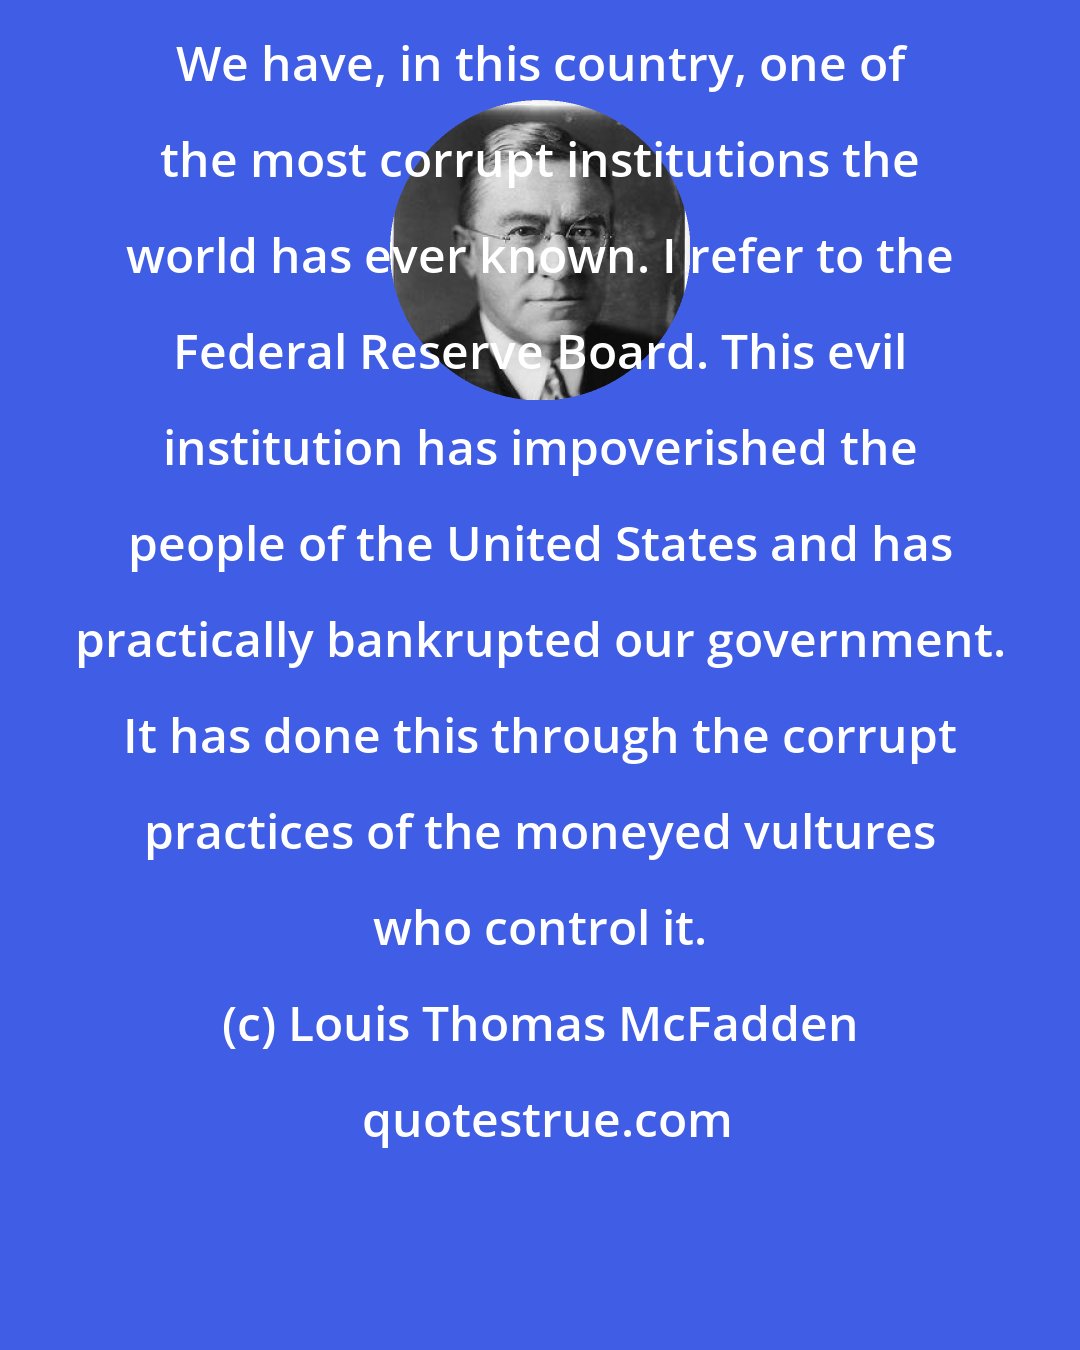 Louis Thomas McFadden: We have, in this country, one of the most corrupt institutions the world has ever known. I refer to the Federal Reserve Board. This evil institution has impoverished the people of the United States and has practically bankrupted our government. It has done this through the corrupt practices of the moneyed vultures who control it.